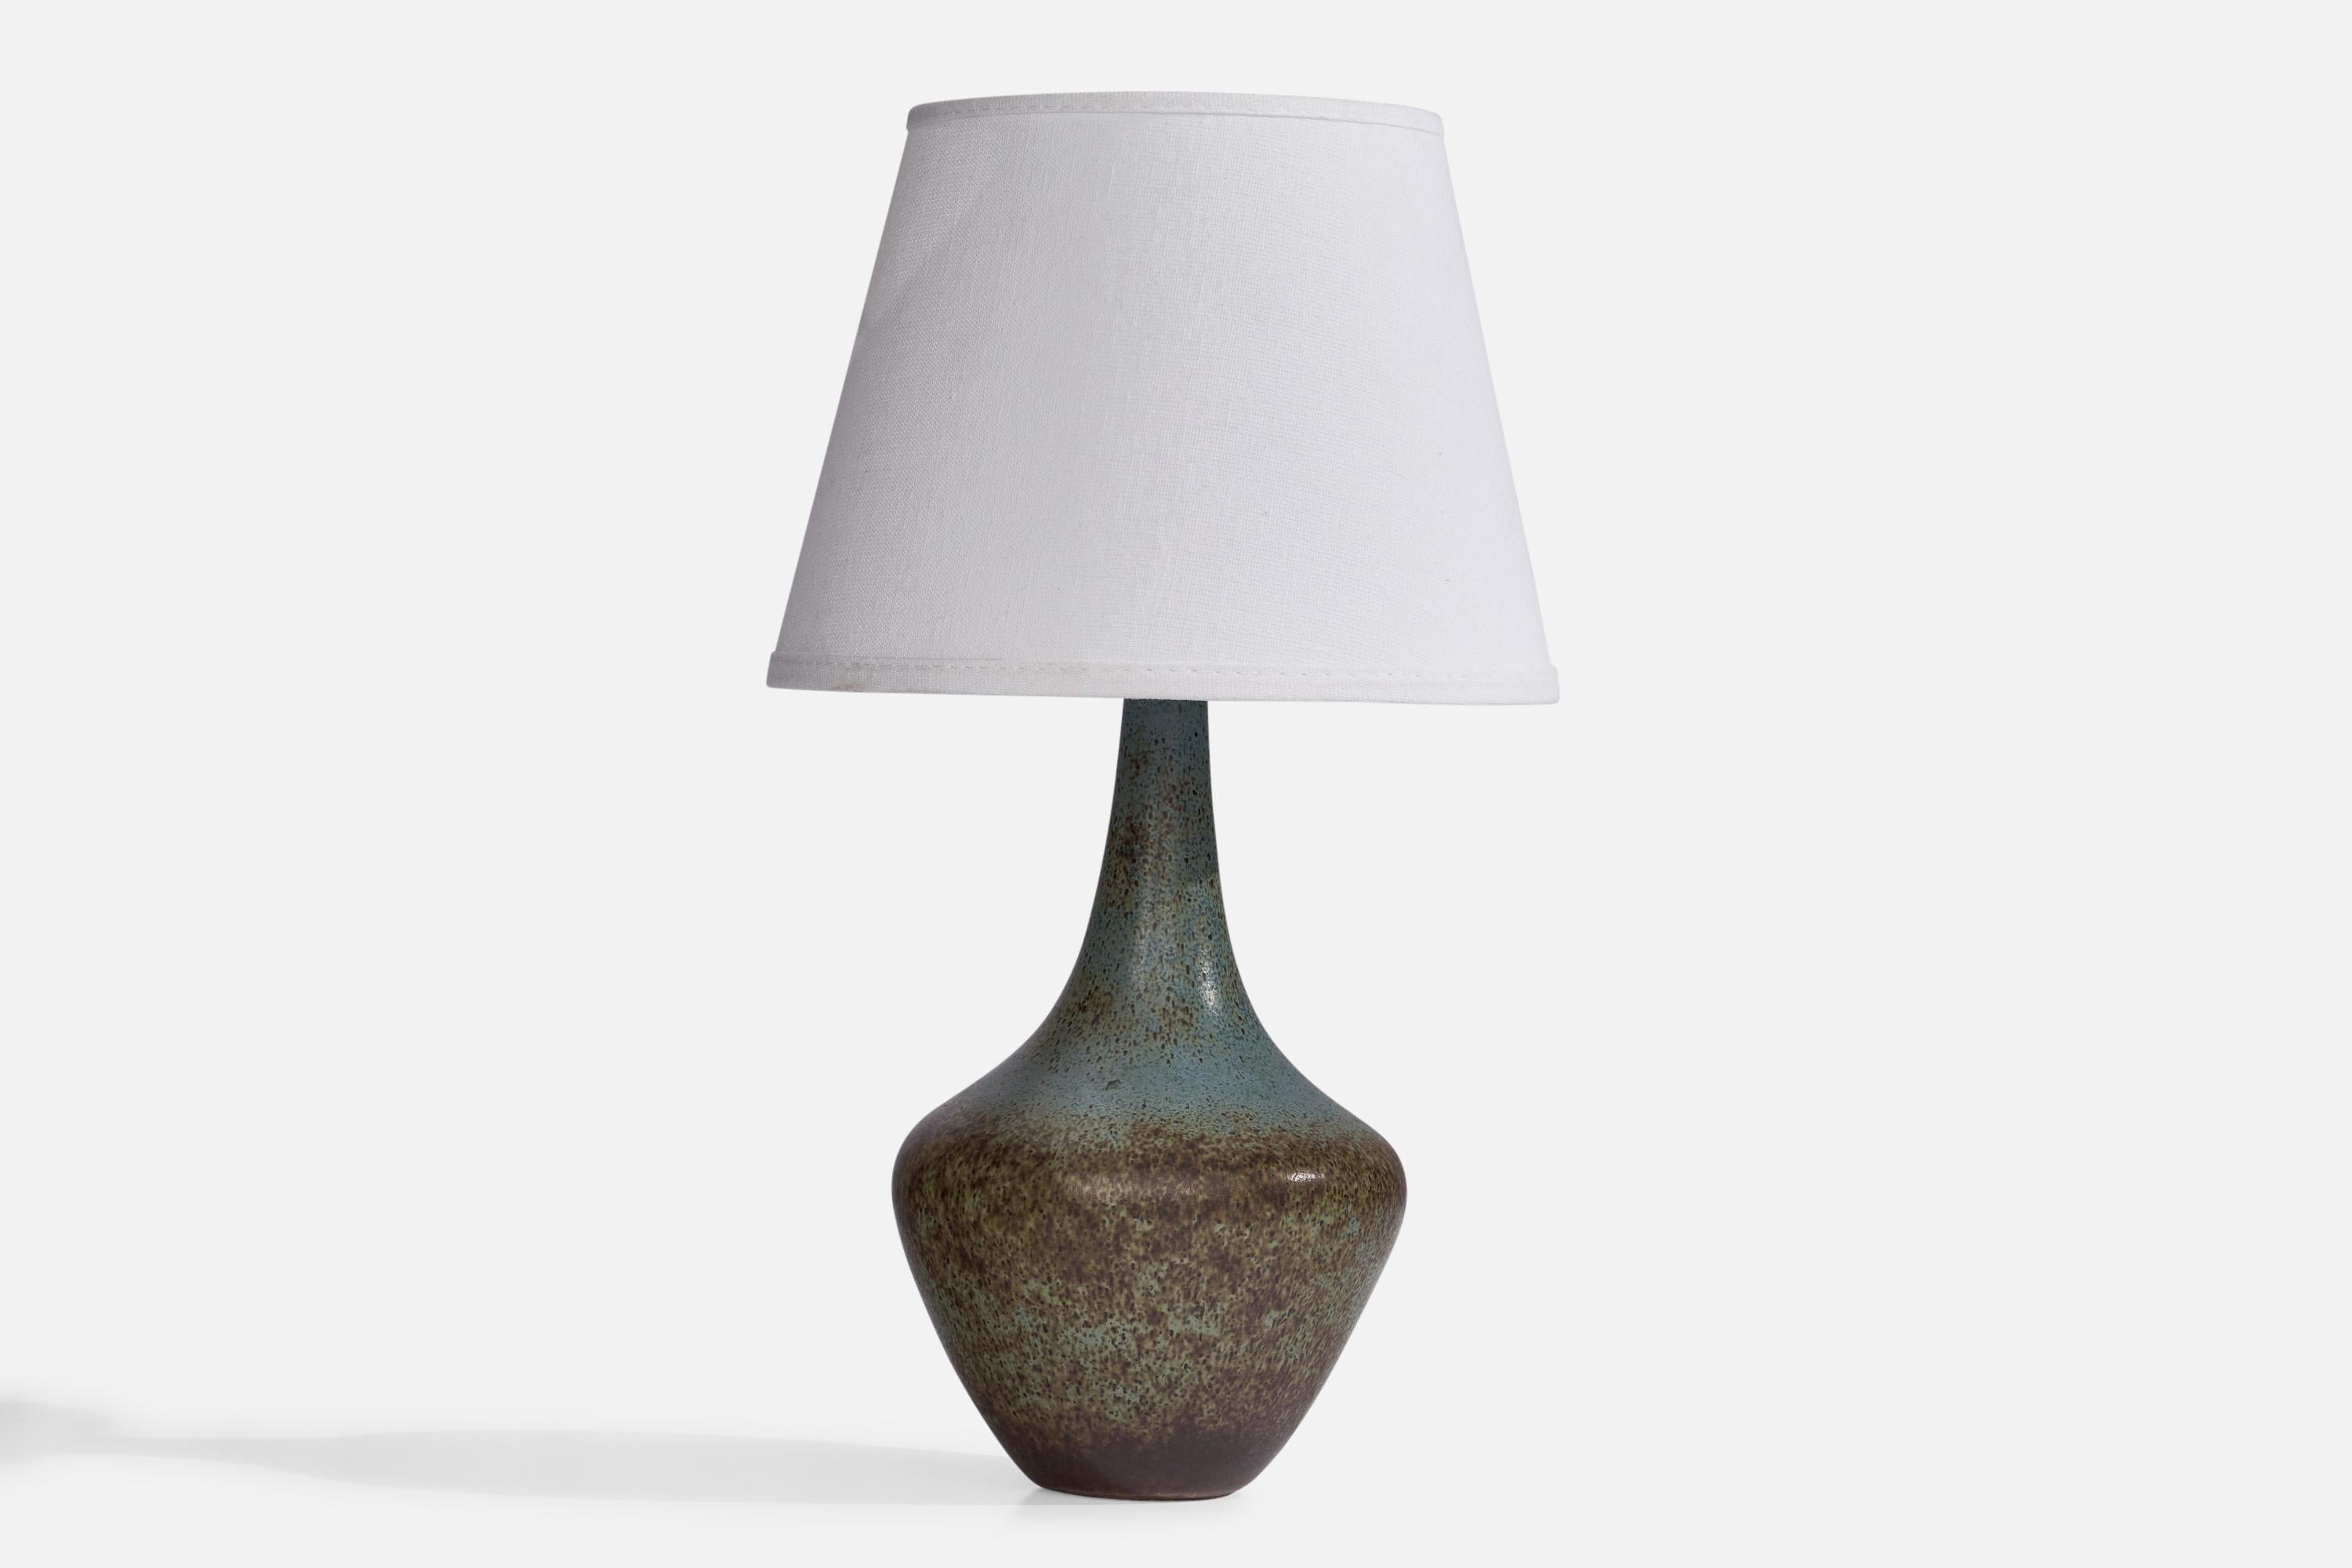 A blue and brown-glazed stoneware table lamp designed by Gunnar Nylund and produced by Rörstrand, Sweden, 1940s.

Dimensions of Lamp (inches): 11.3” H x 5” Diameter
Dimensions of Shade (inches): 5.25” Top Diameter x 8” Bottom Diameter x 6”